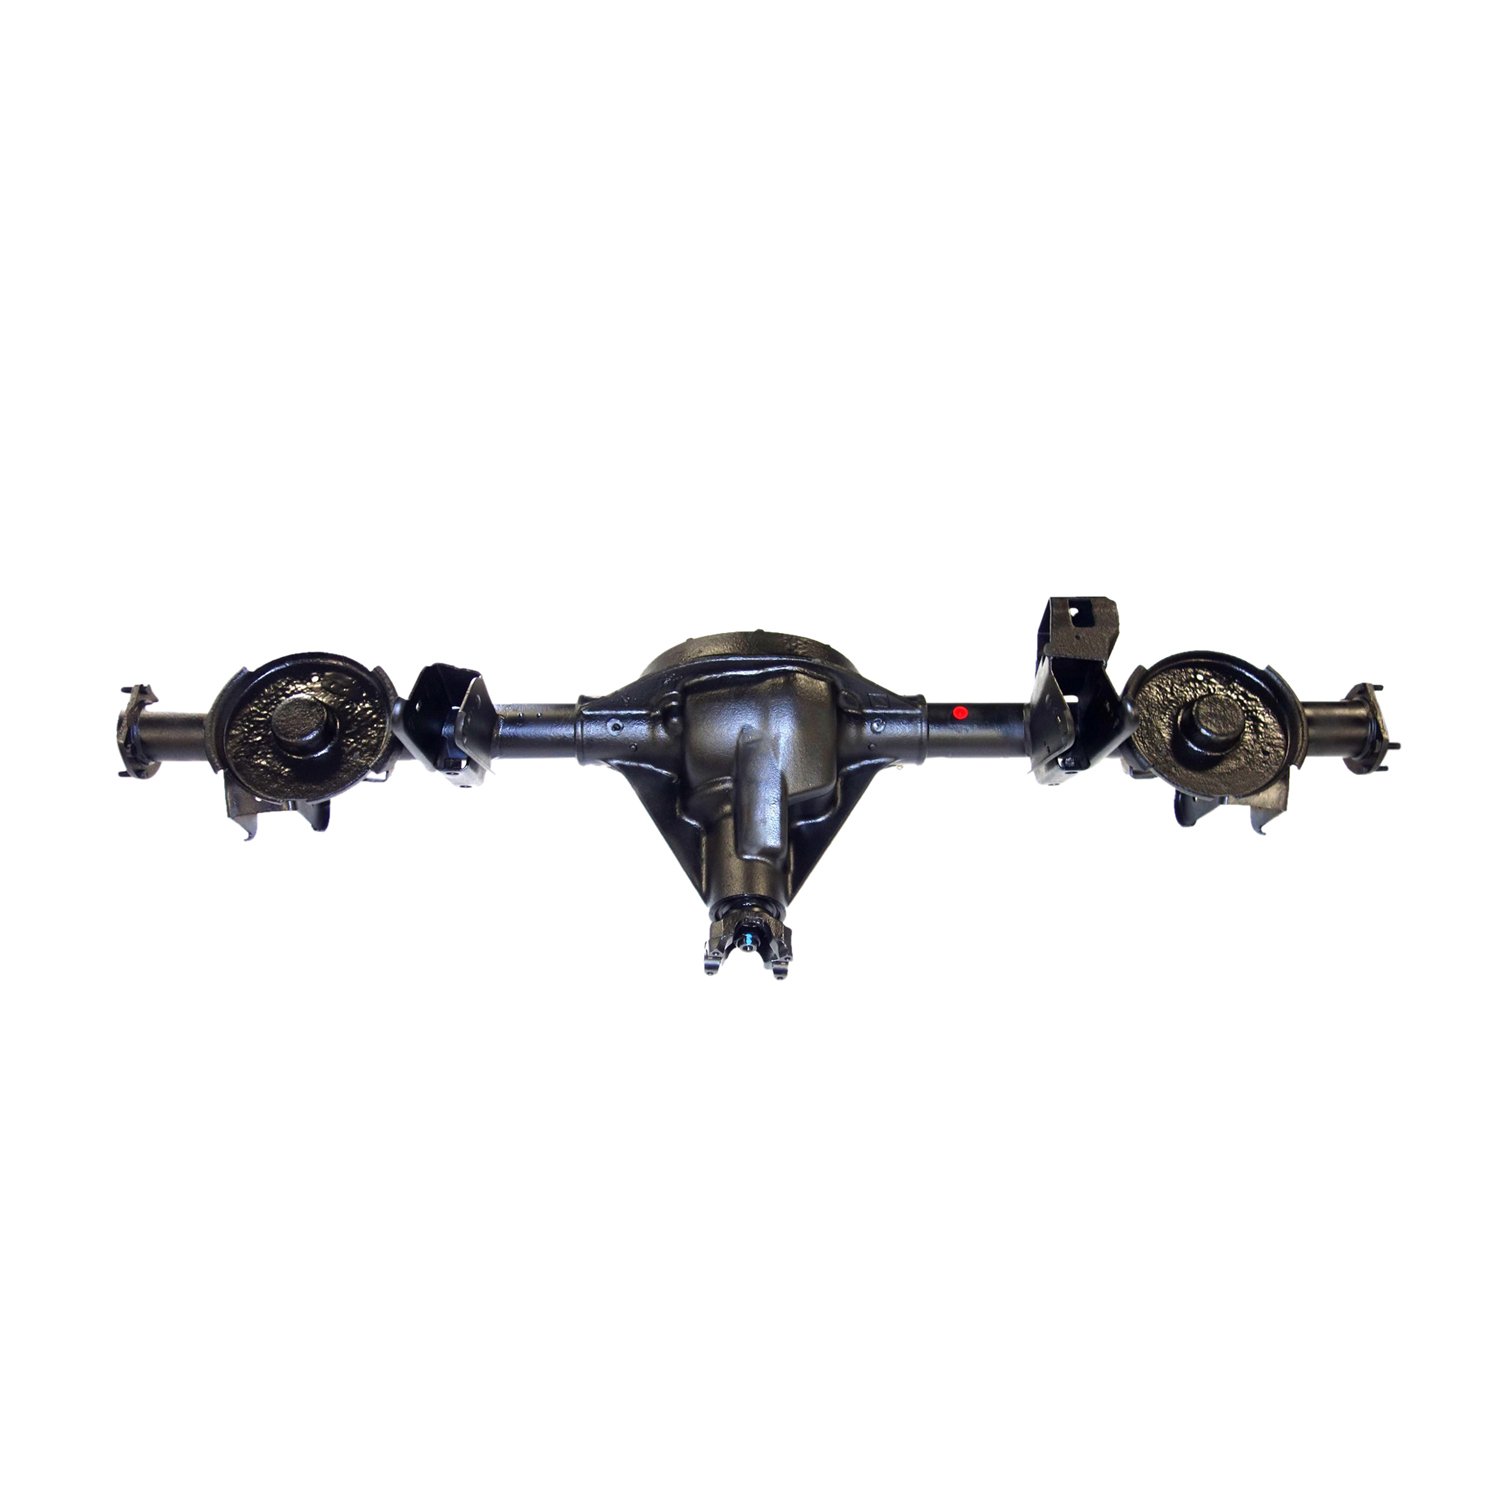 Remanufactured Complete Axle Assembly for Dana 35 97-02 Wrangler 4.11 with ABS, Posi LSD